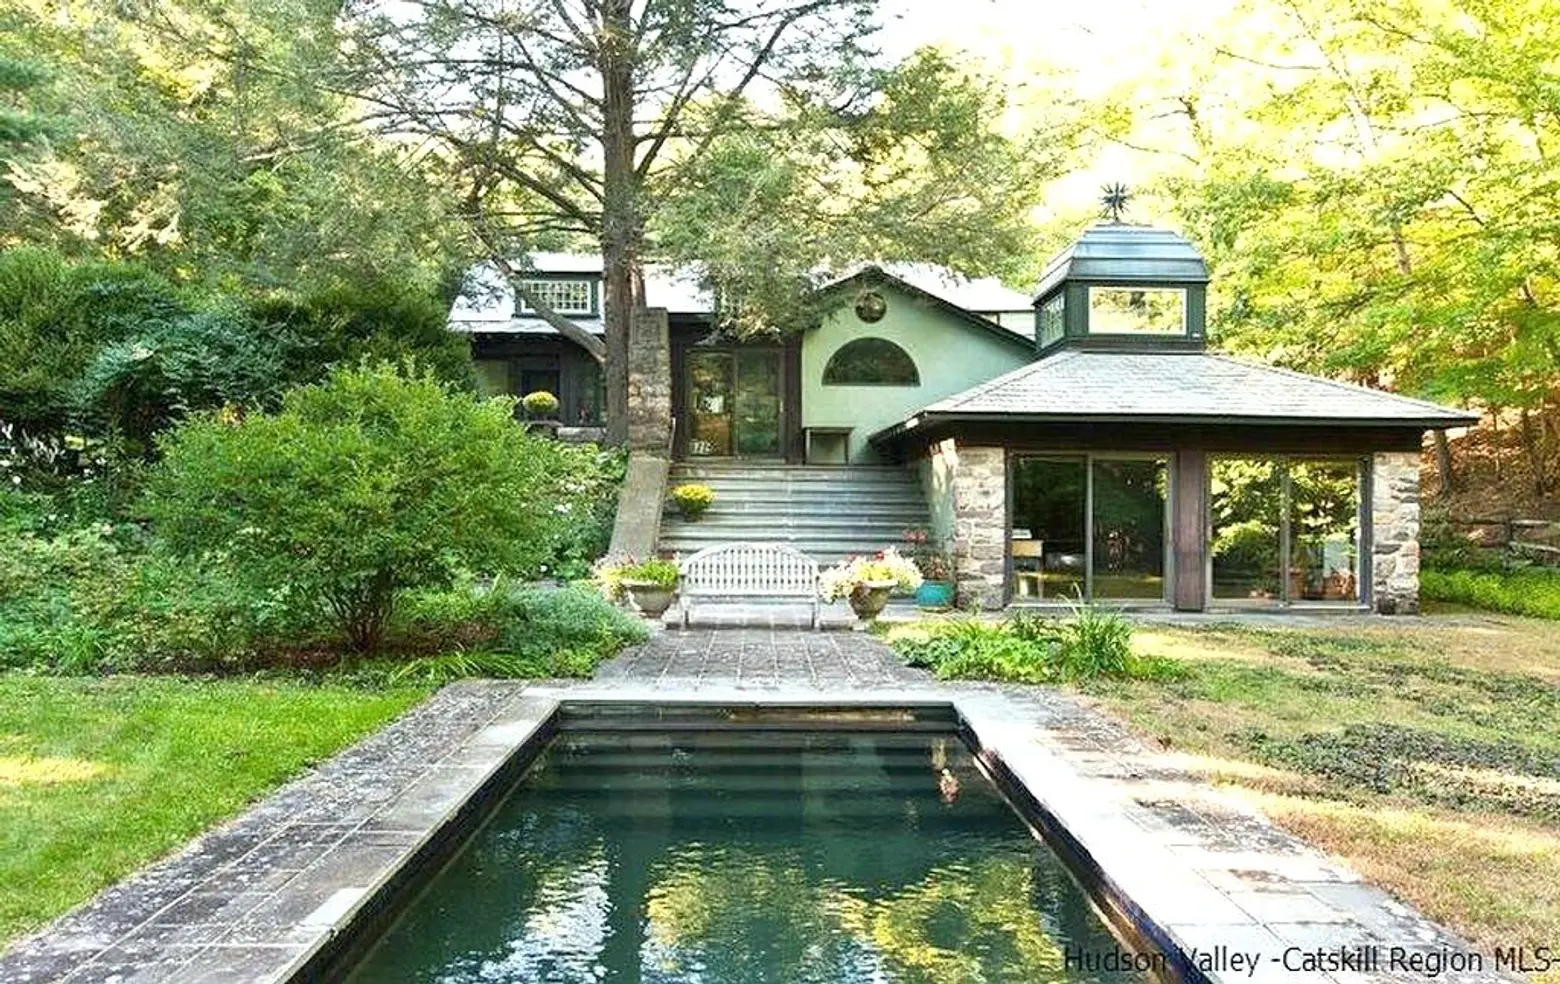 Own the incredible Arts and Crafts home where Milton Glaser designed the ‘I ♥ NY’ logo